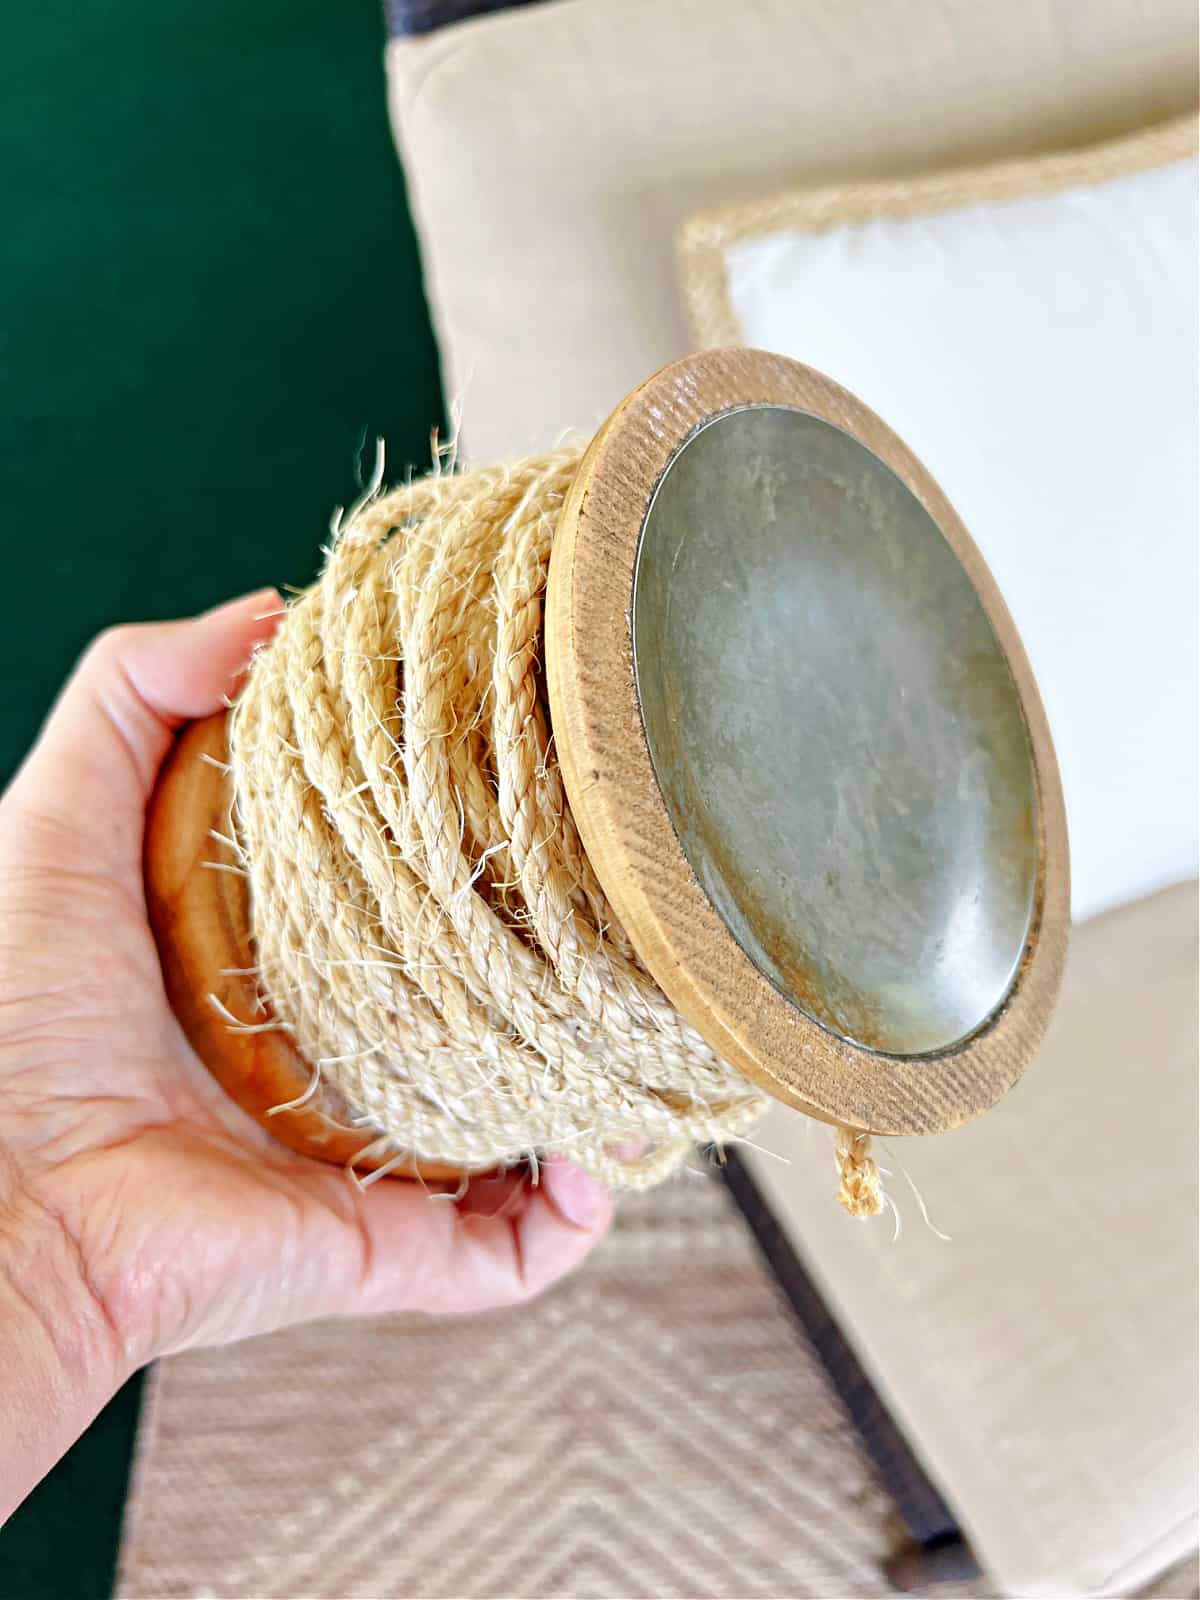 twine wrapped around a wooden candle holder